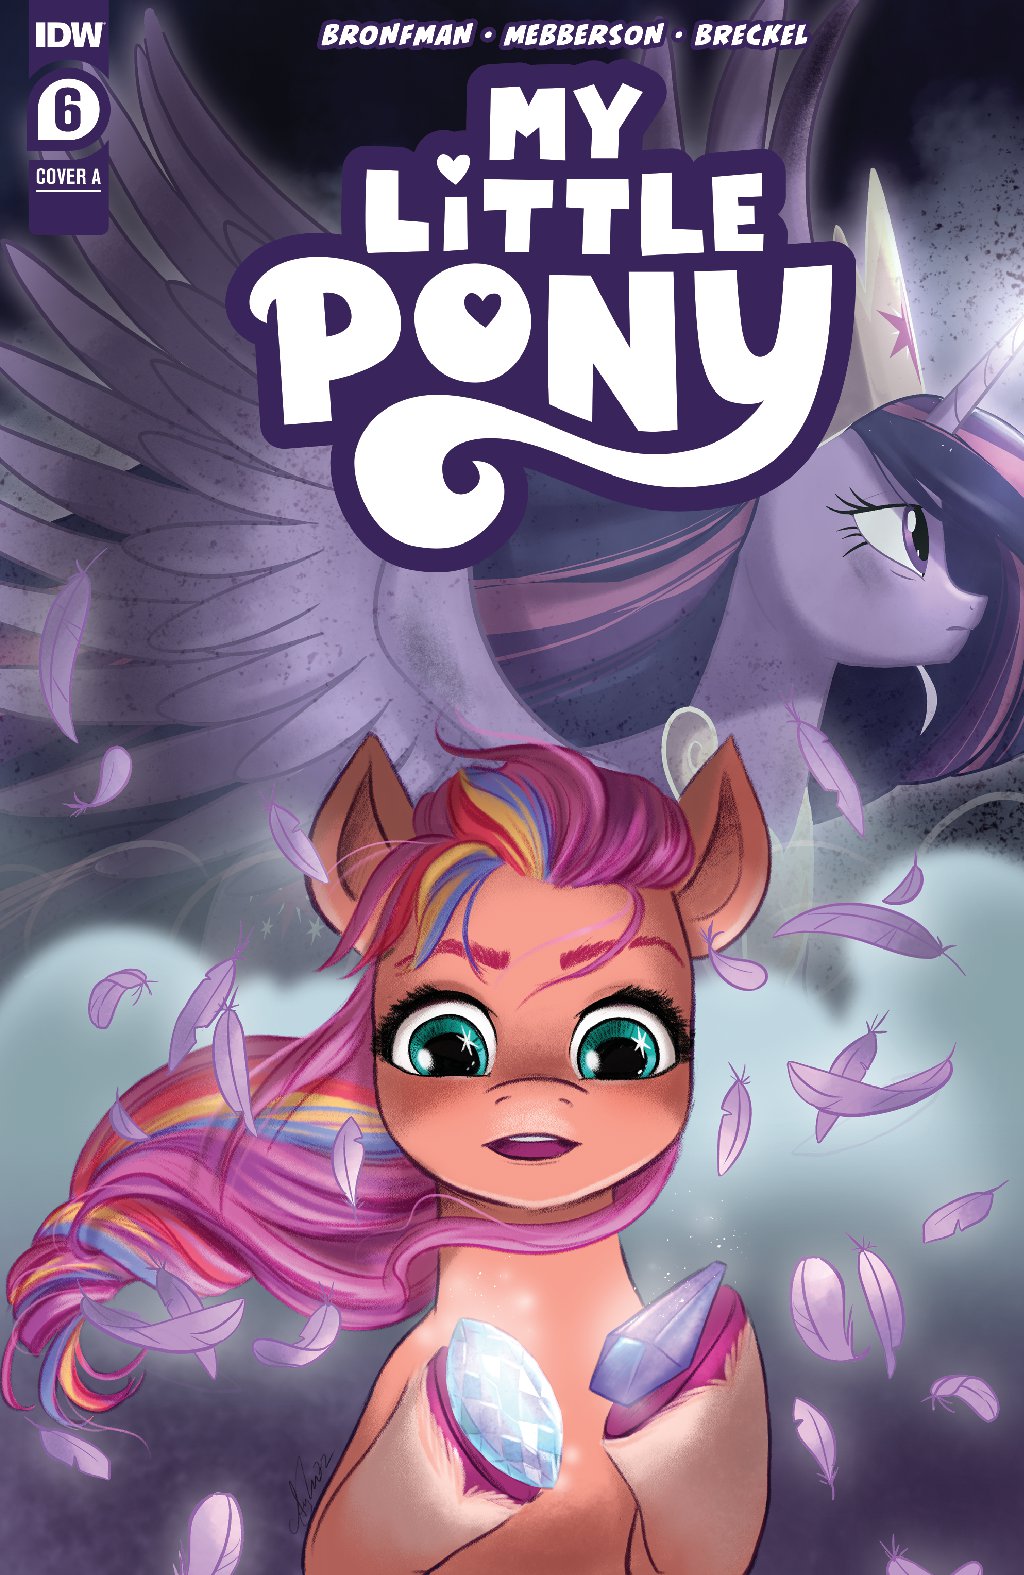 Equestria Daily MLP Stuff!: My Pony: Generation 5 Released Today! - Download Links, Variants, Discussion, Let's Review!